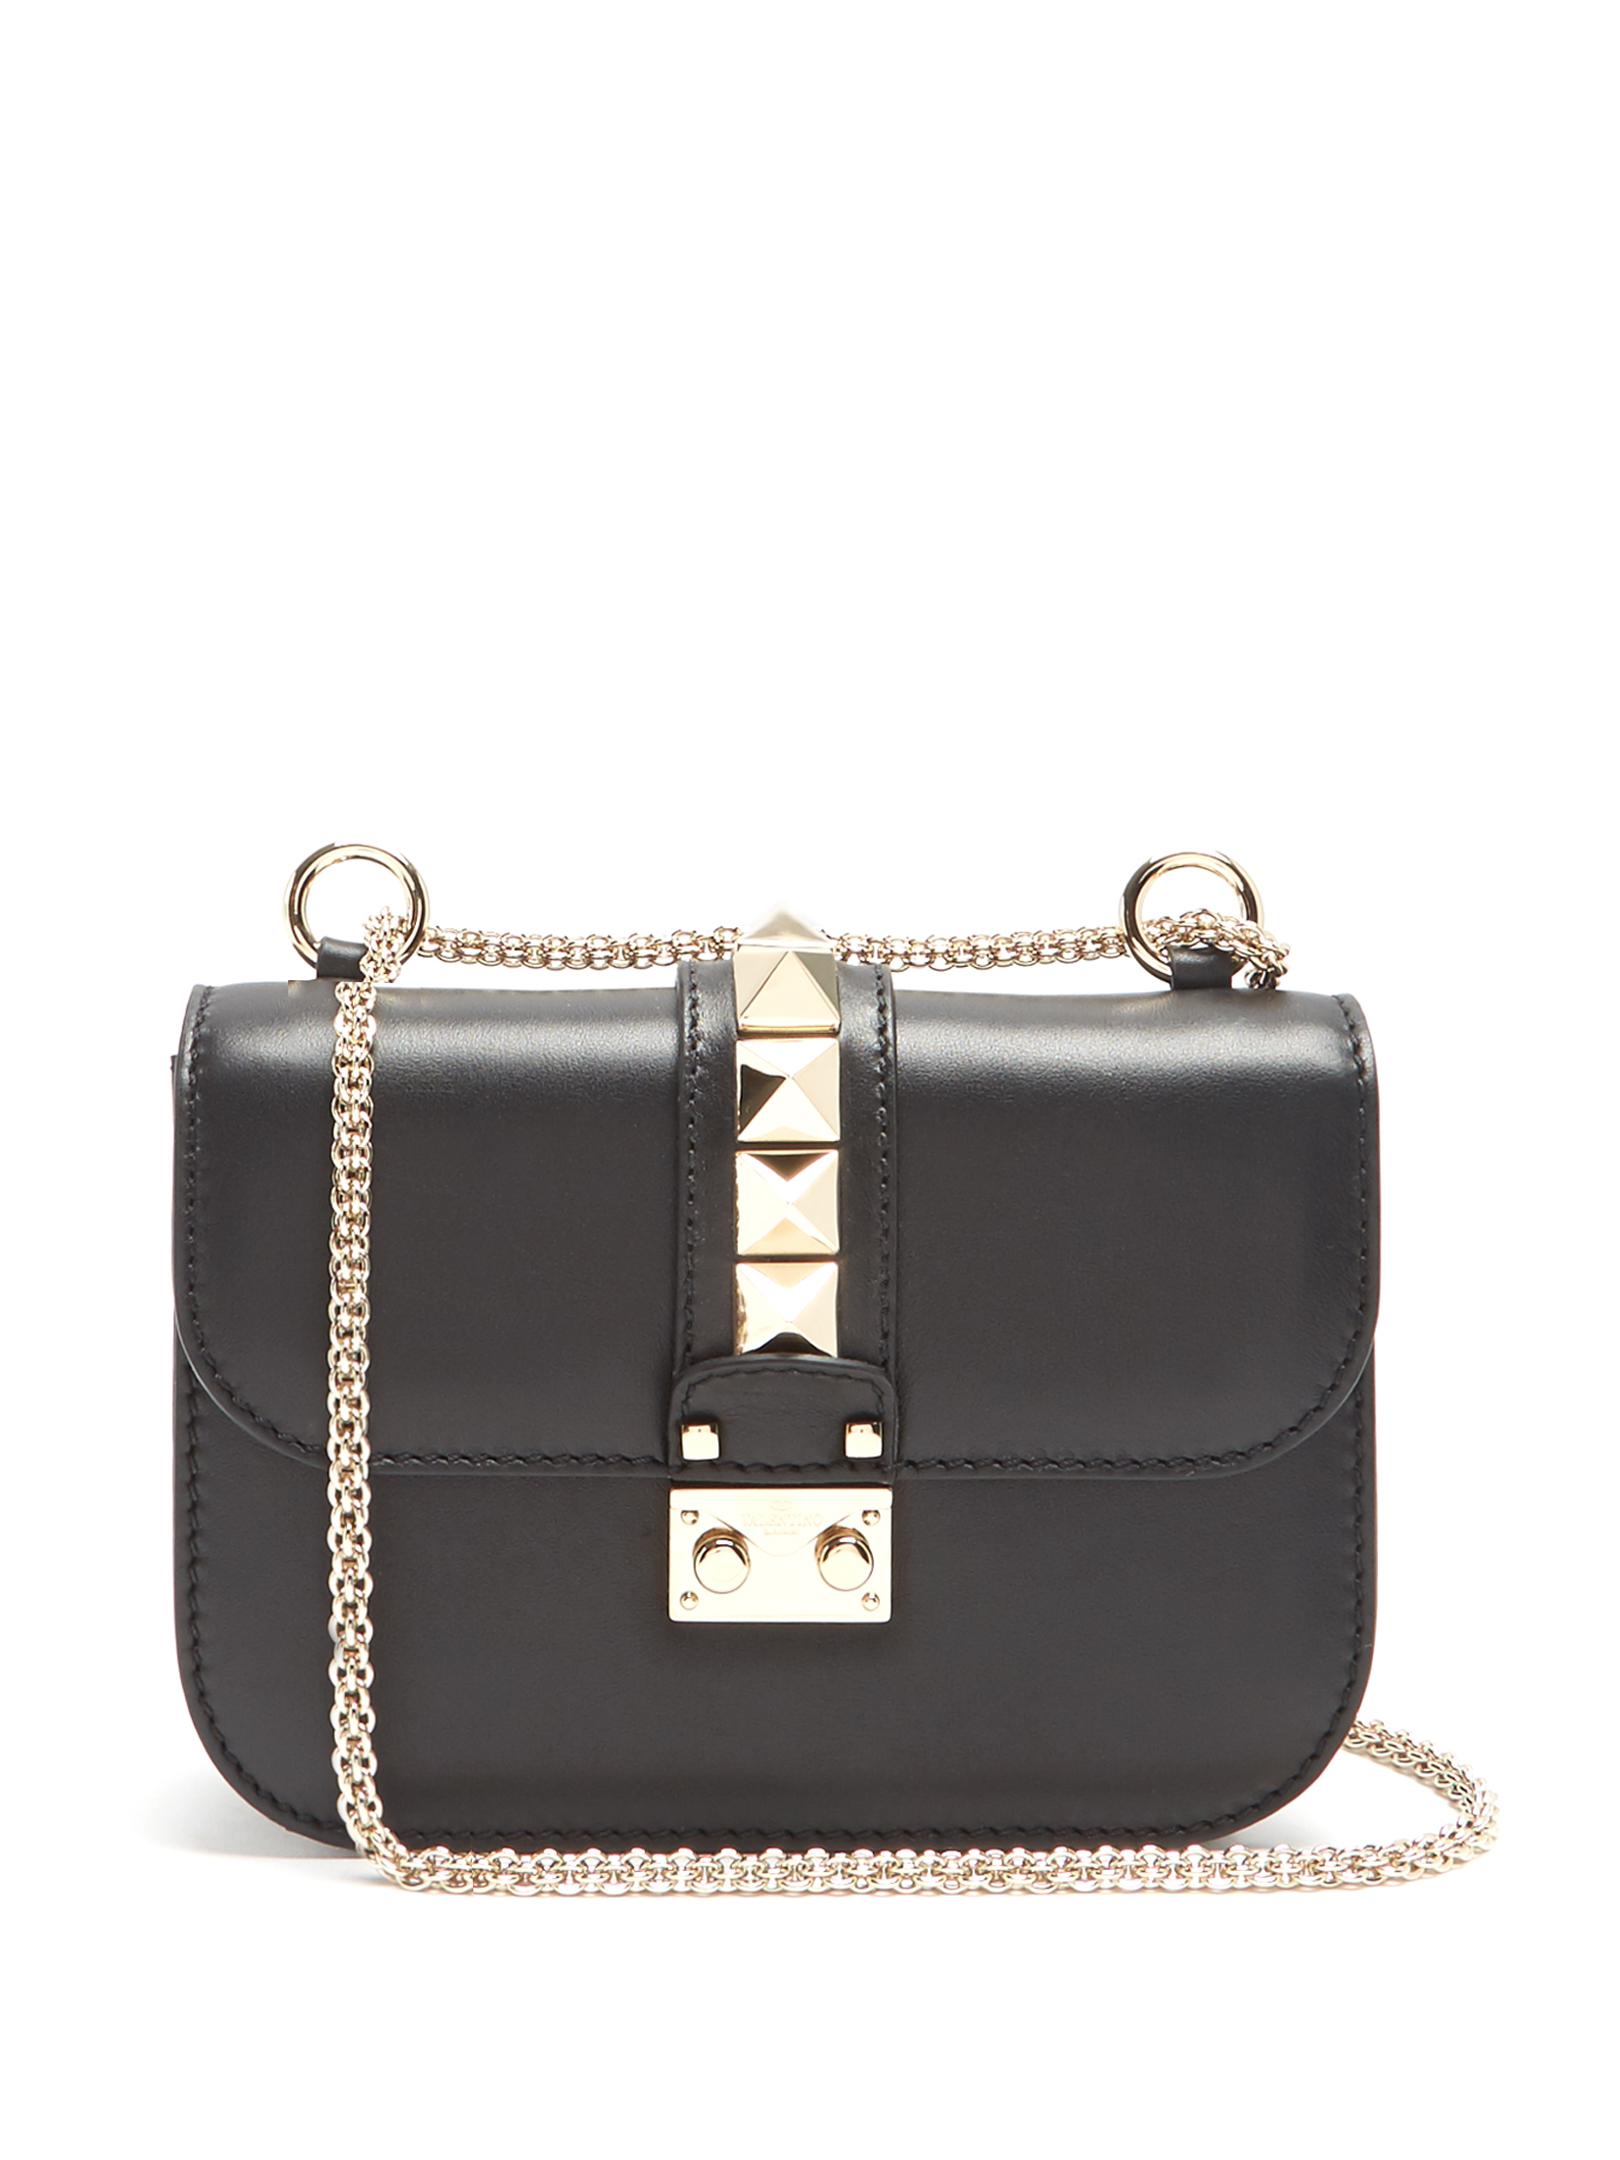 Valentino Lock Small Leather Shoulder Bag in Black - Lyst